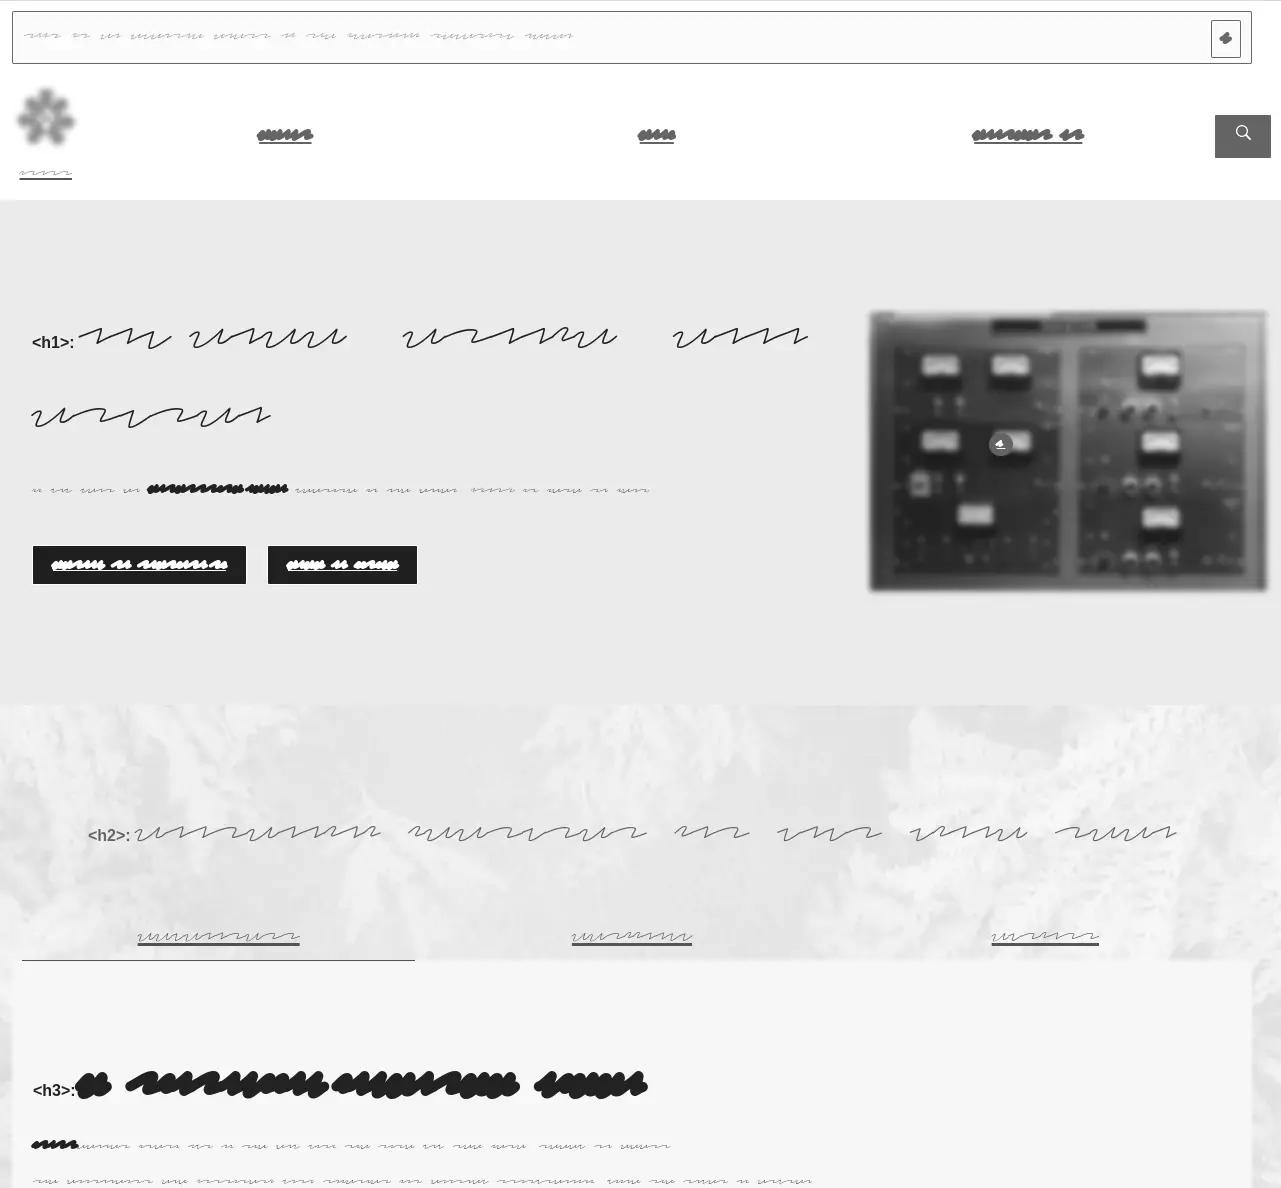 A wireframe version of the frost homepage, generated by the Page to Wireframe Chrome extension